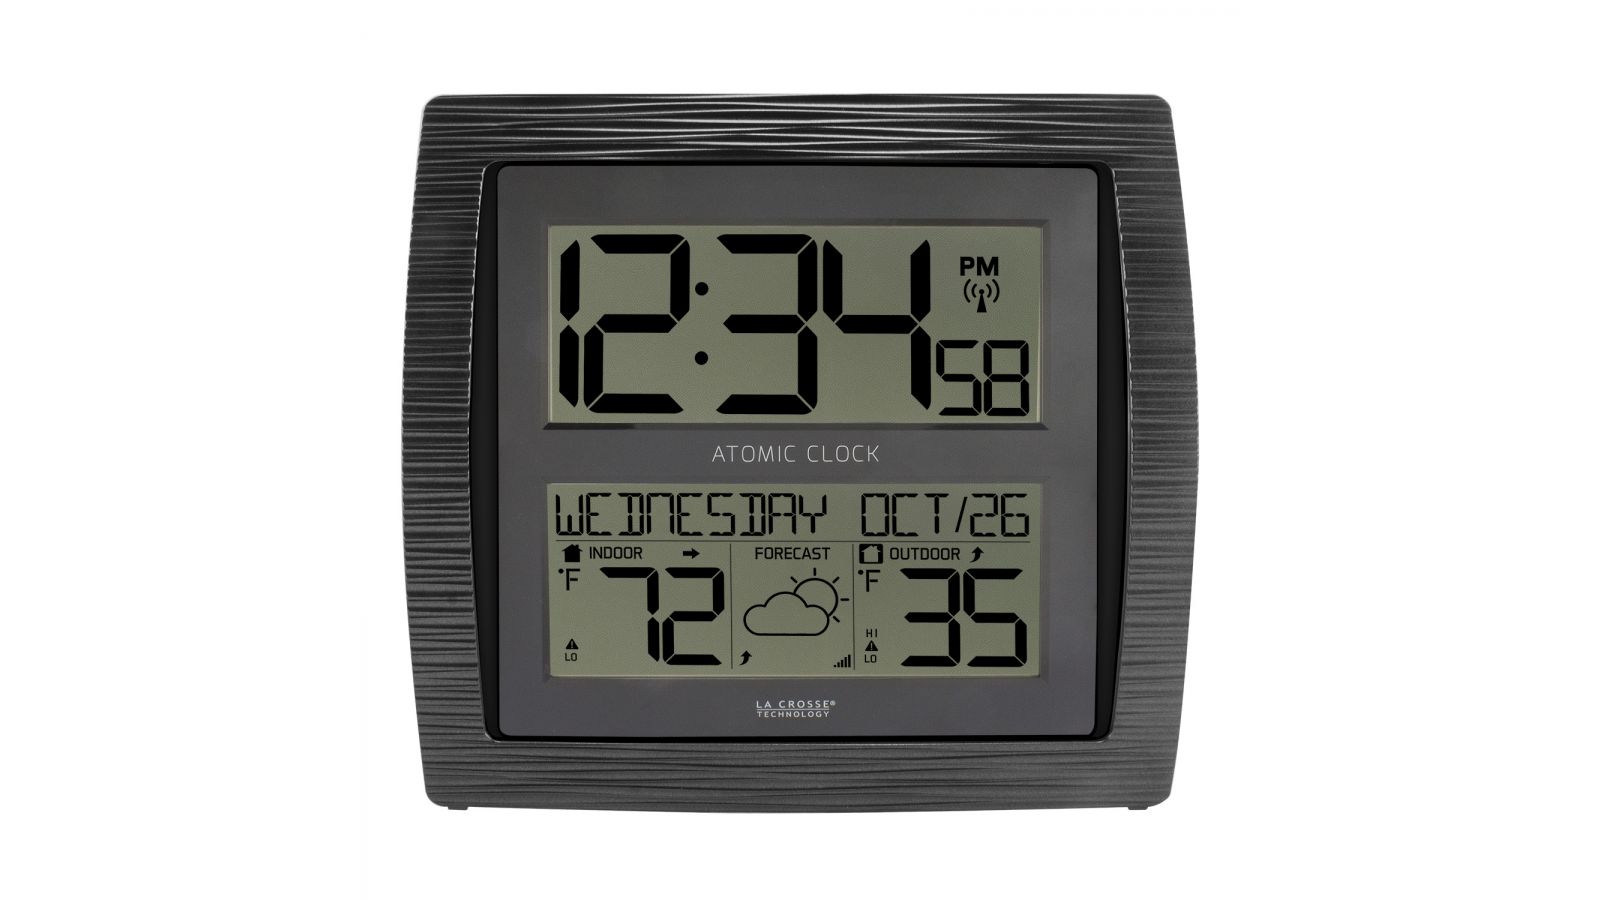 Atomic Clock & Weather Station with Indoor/Outdoor Temperature & Forecast